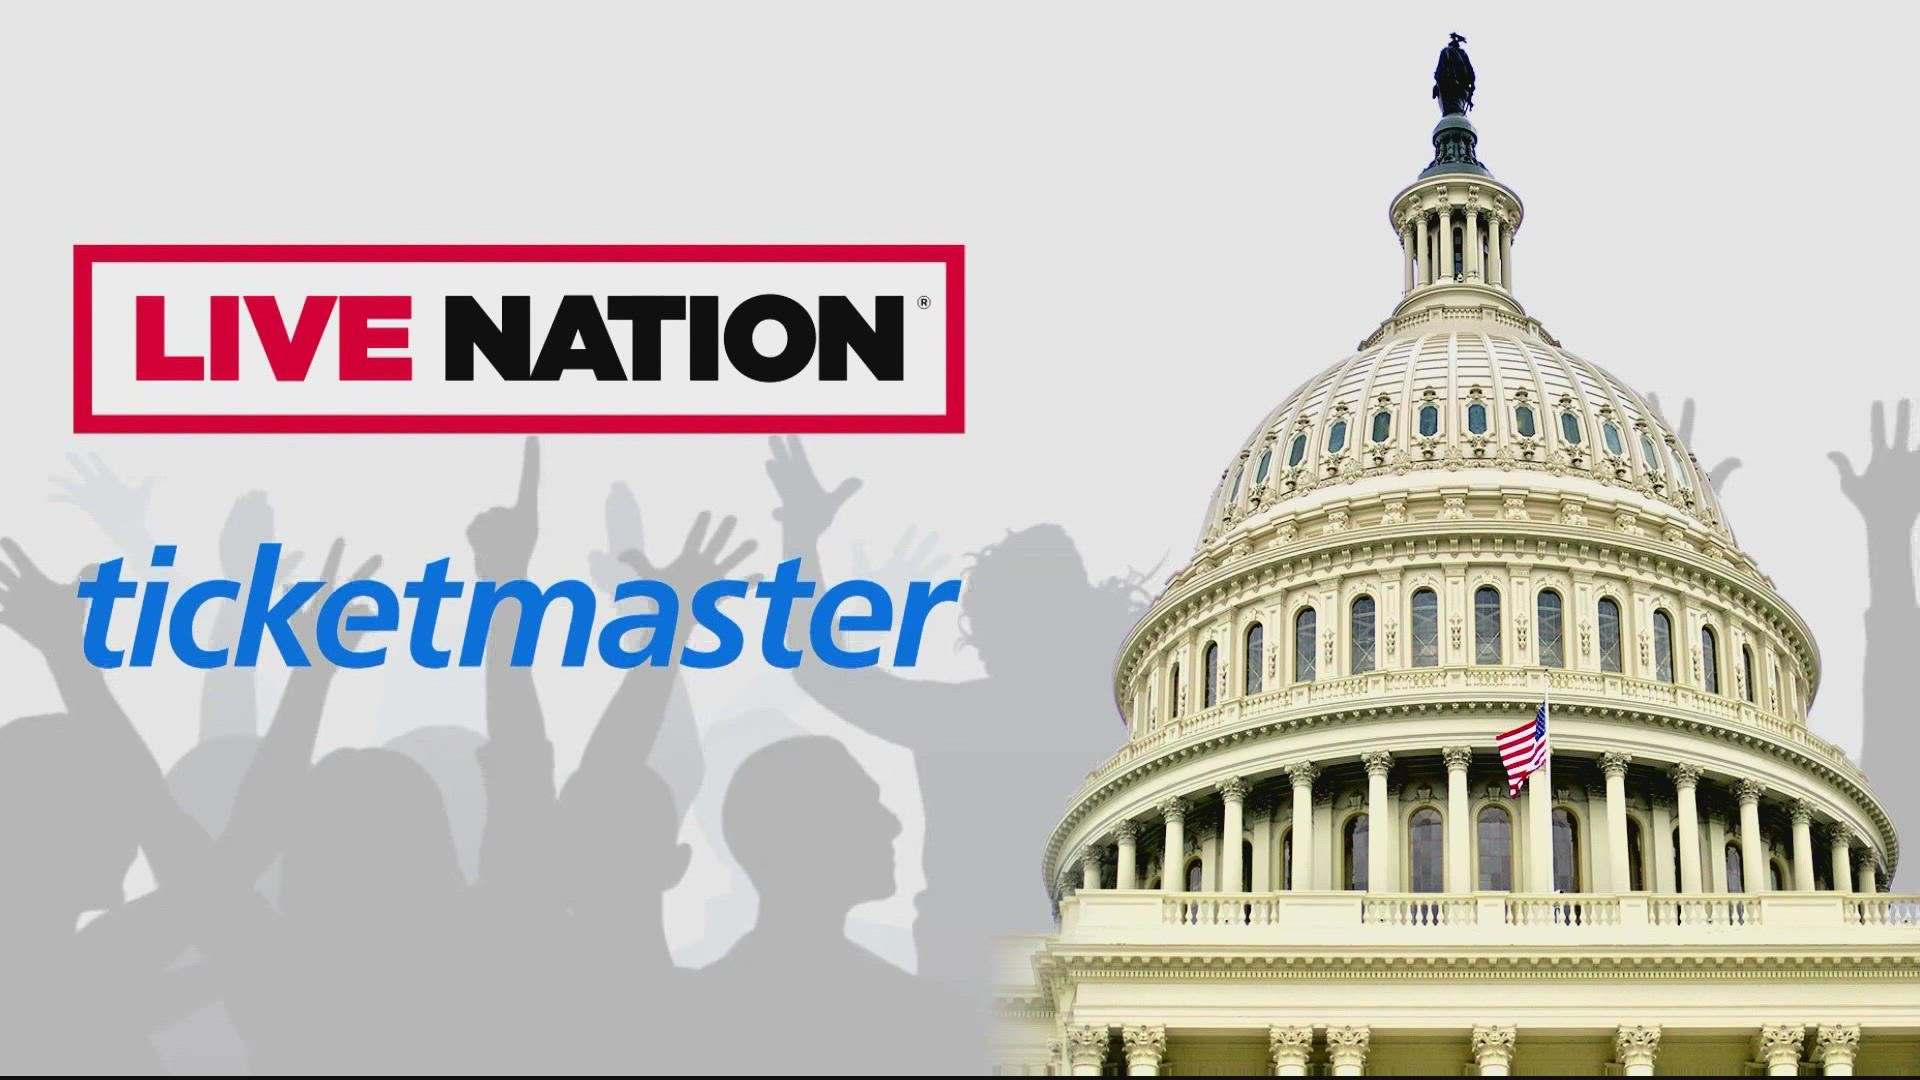 On Tuesday, January 24, a small organization in DC known as Free Britney America will host a Ticketmaster protest outside the U.S. Capitol.